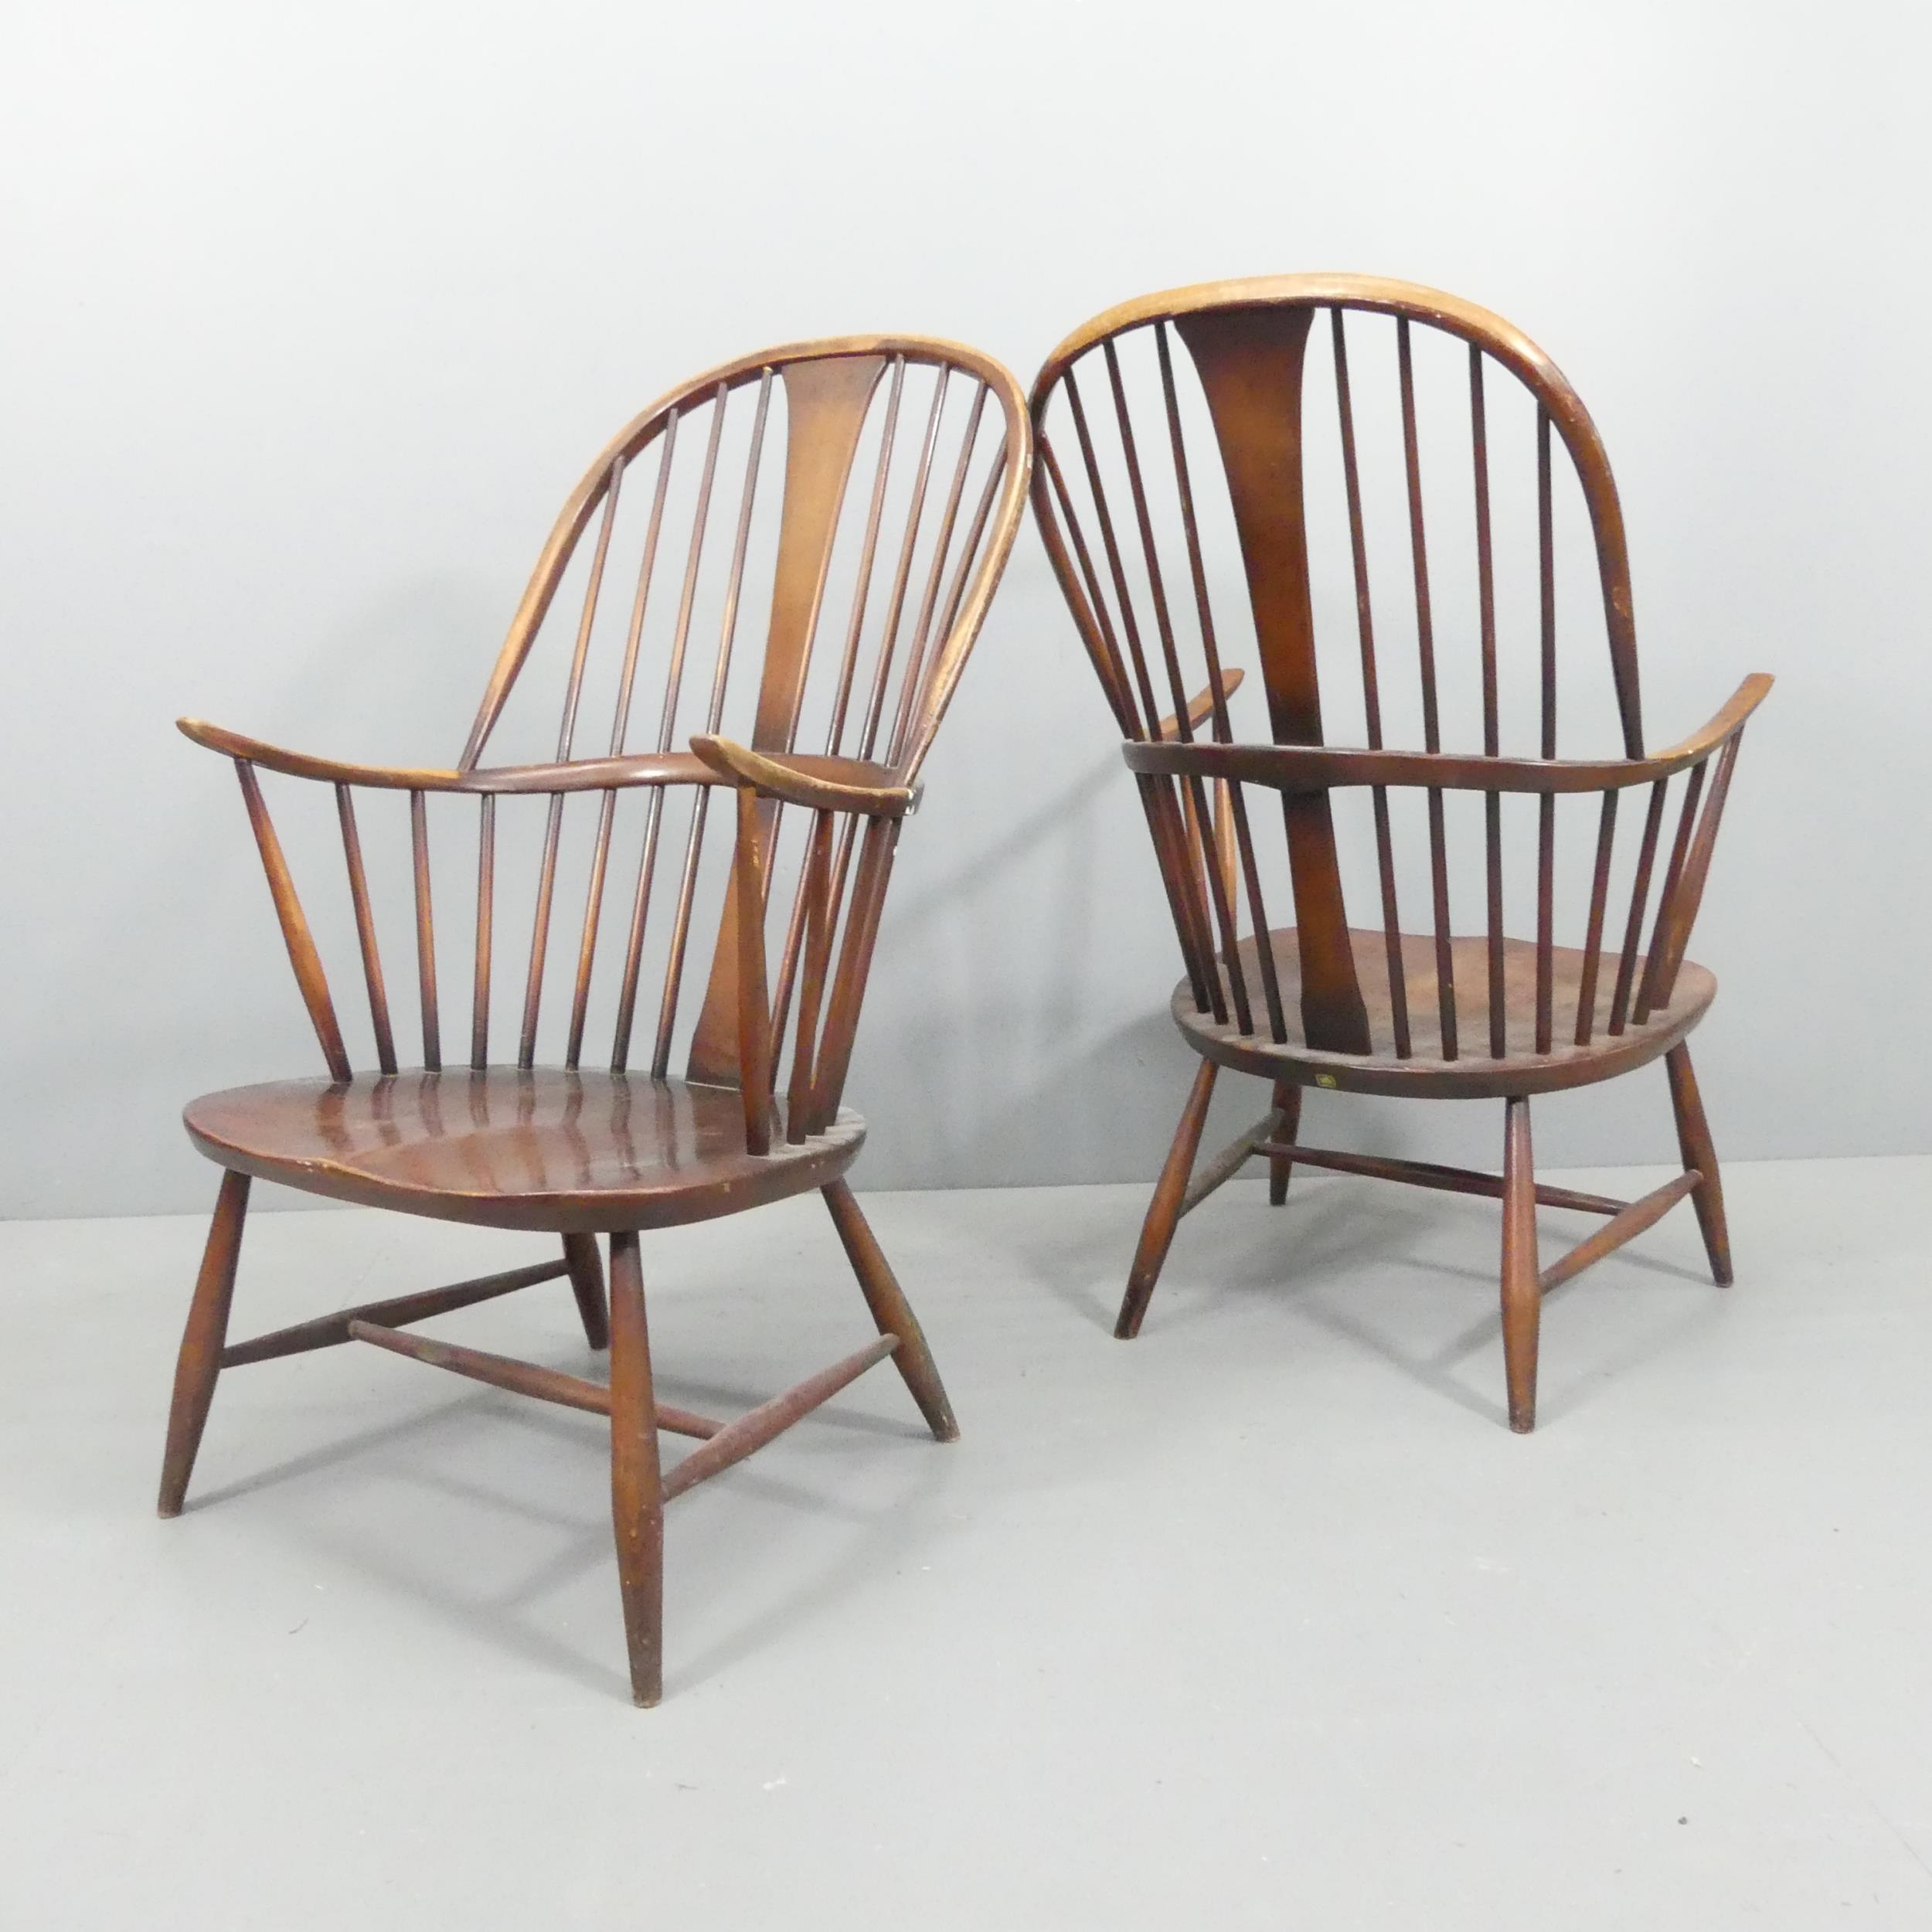 ERCOL - a pair of mid-century Chairmaker's comb-back elbow chairs. With maker's labels. - Image 2 of 3